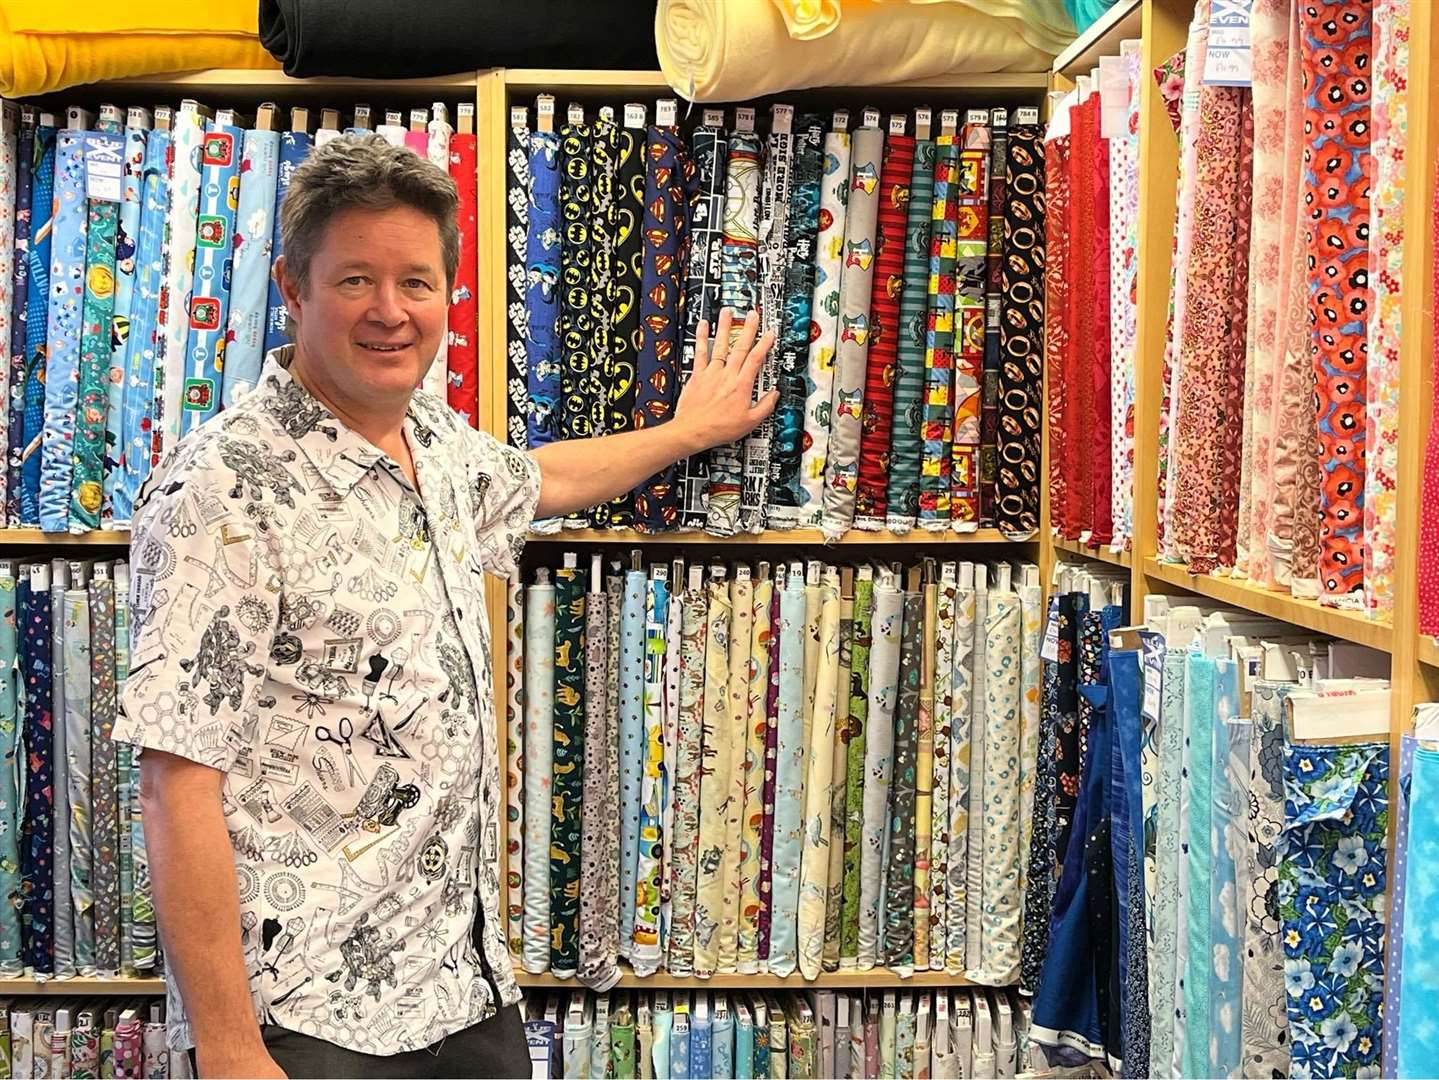 Garry Pinkerton, from World of Sewing in Tunbridge Wells, defended his store for selling the controversial fabric. Picture: Garry Pinkerton